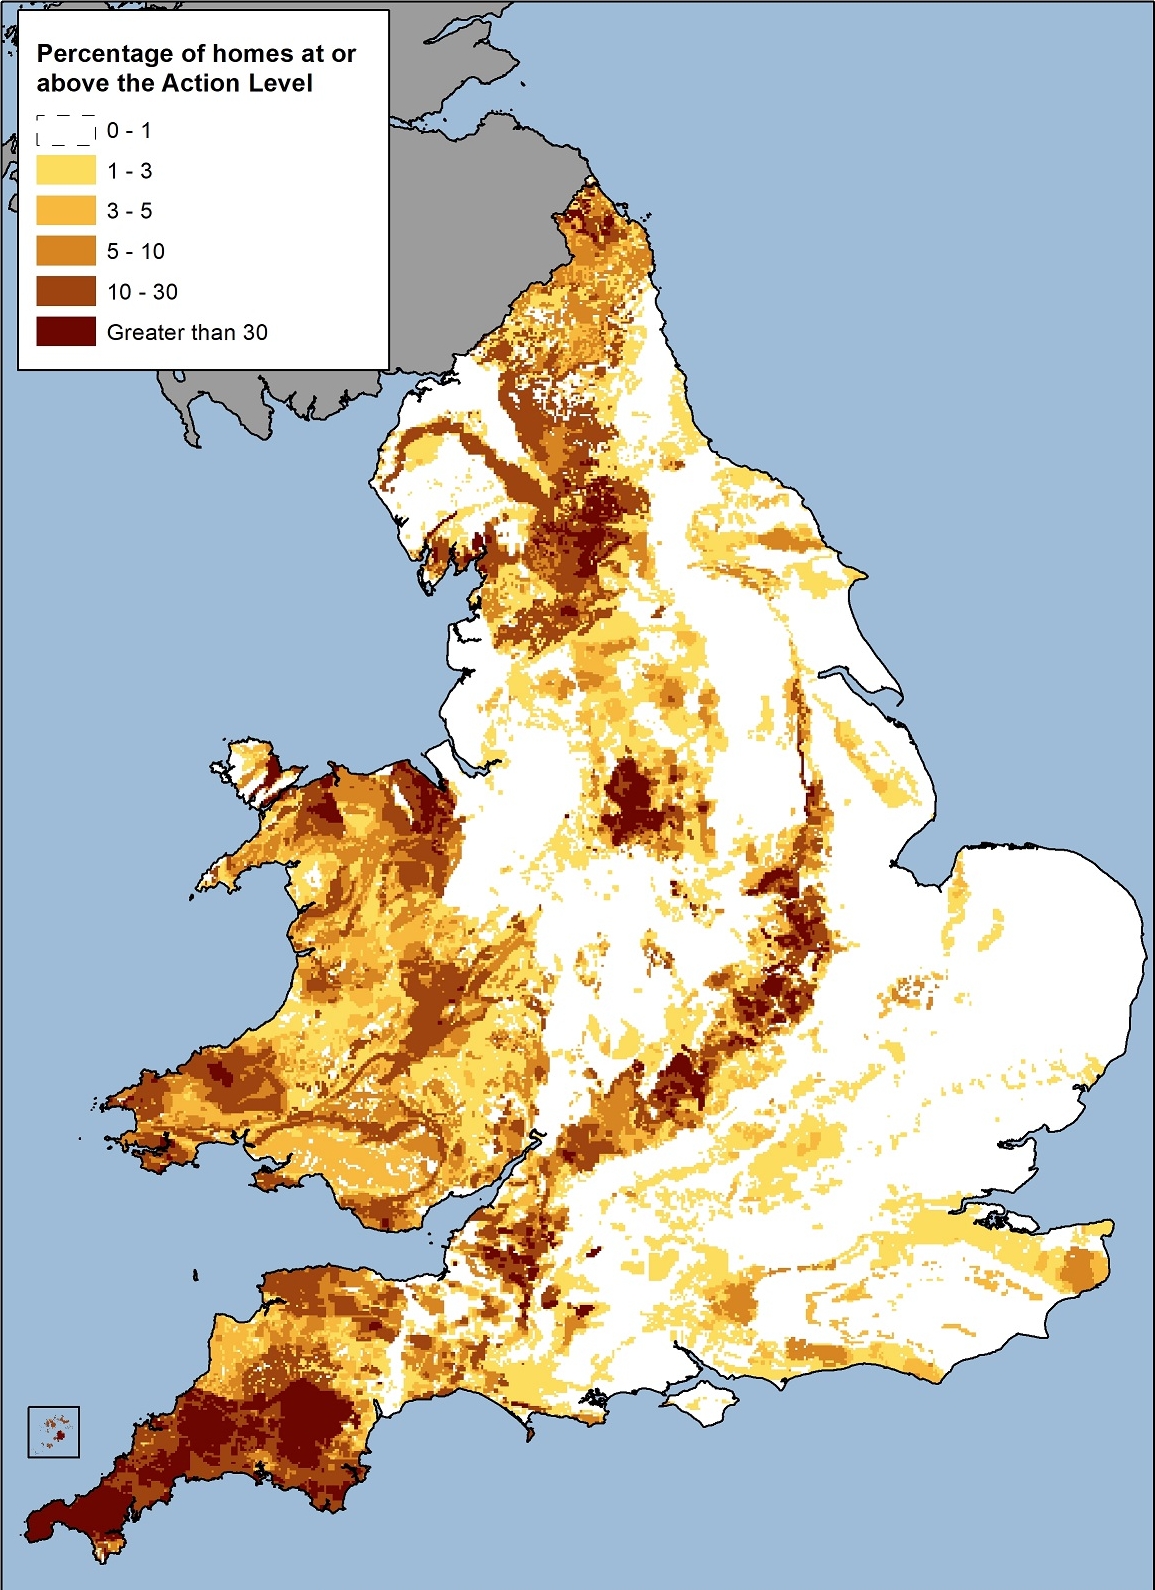 Map illustrating percentage of homes in England and Wales at or above the level for action on Radon